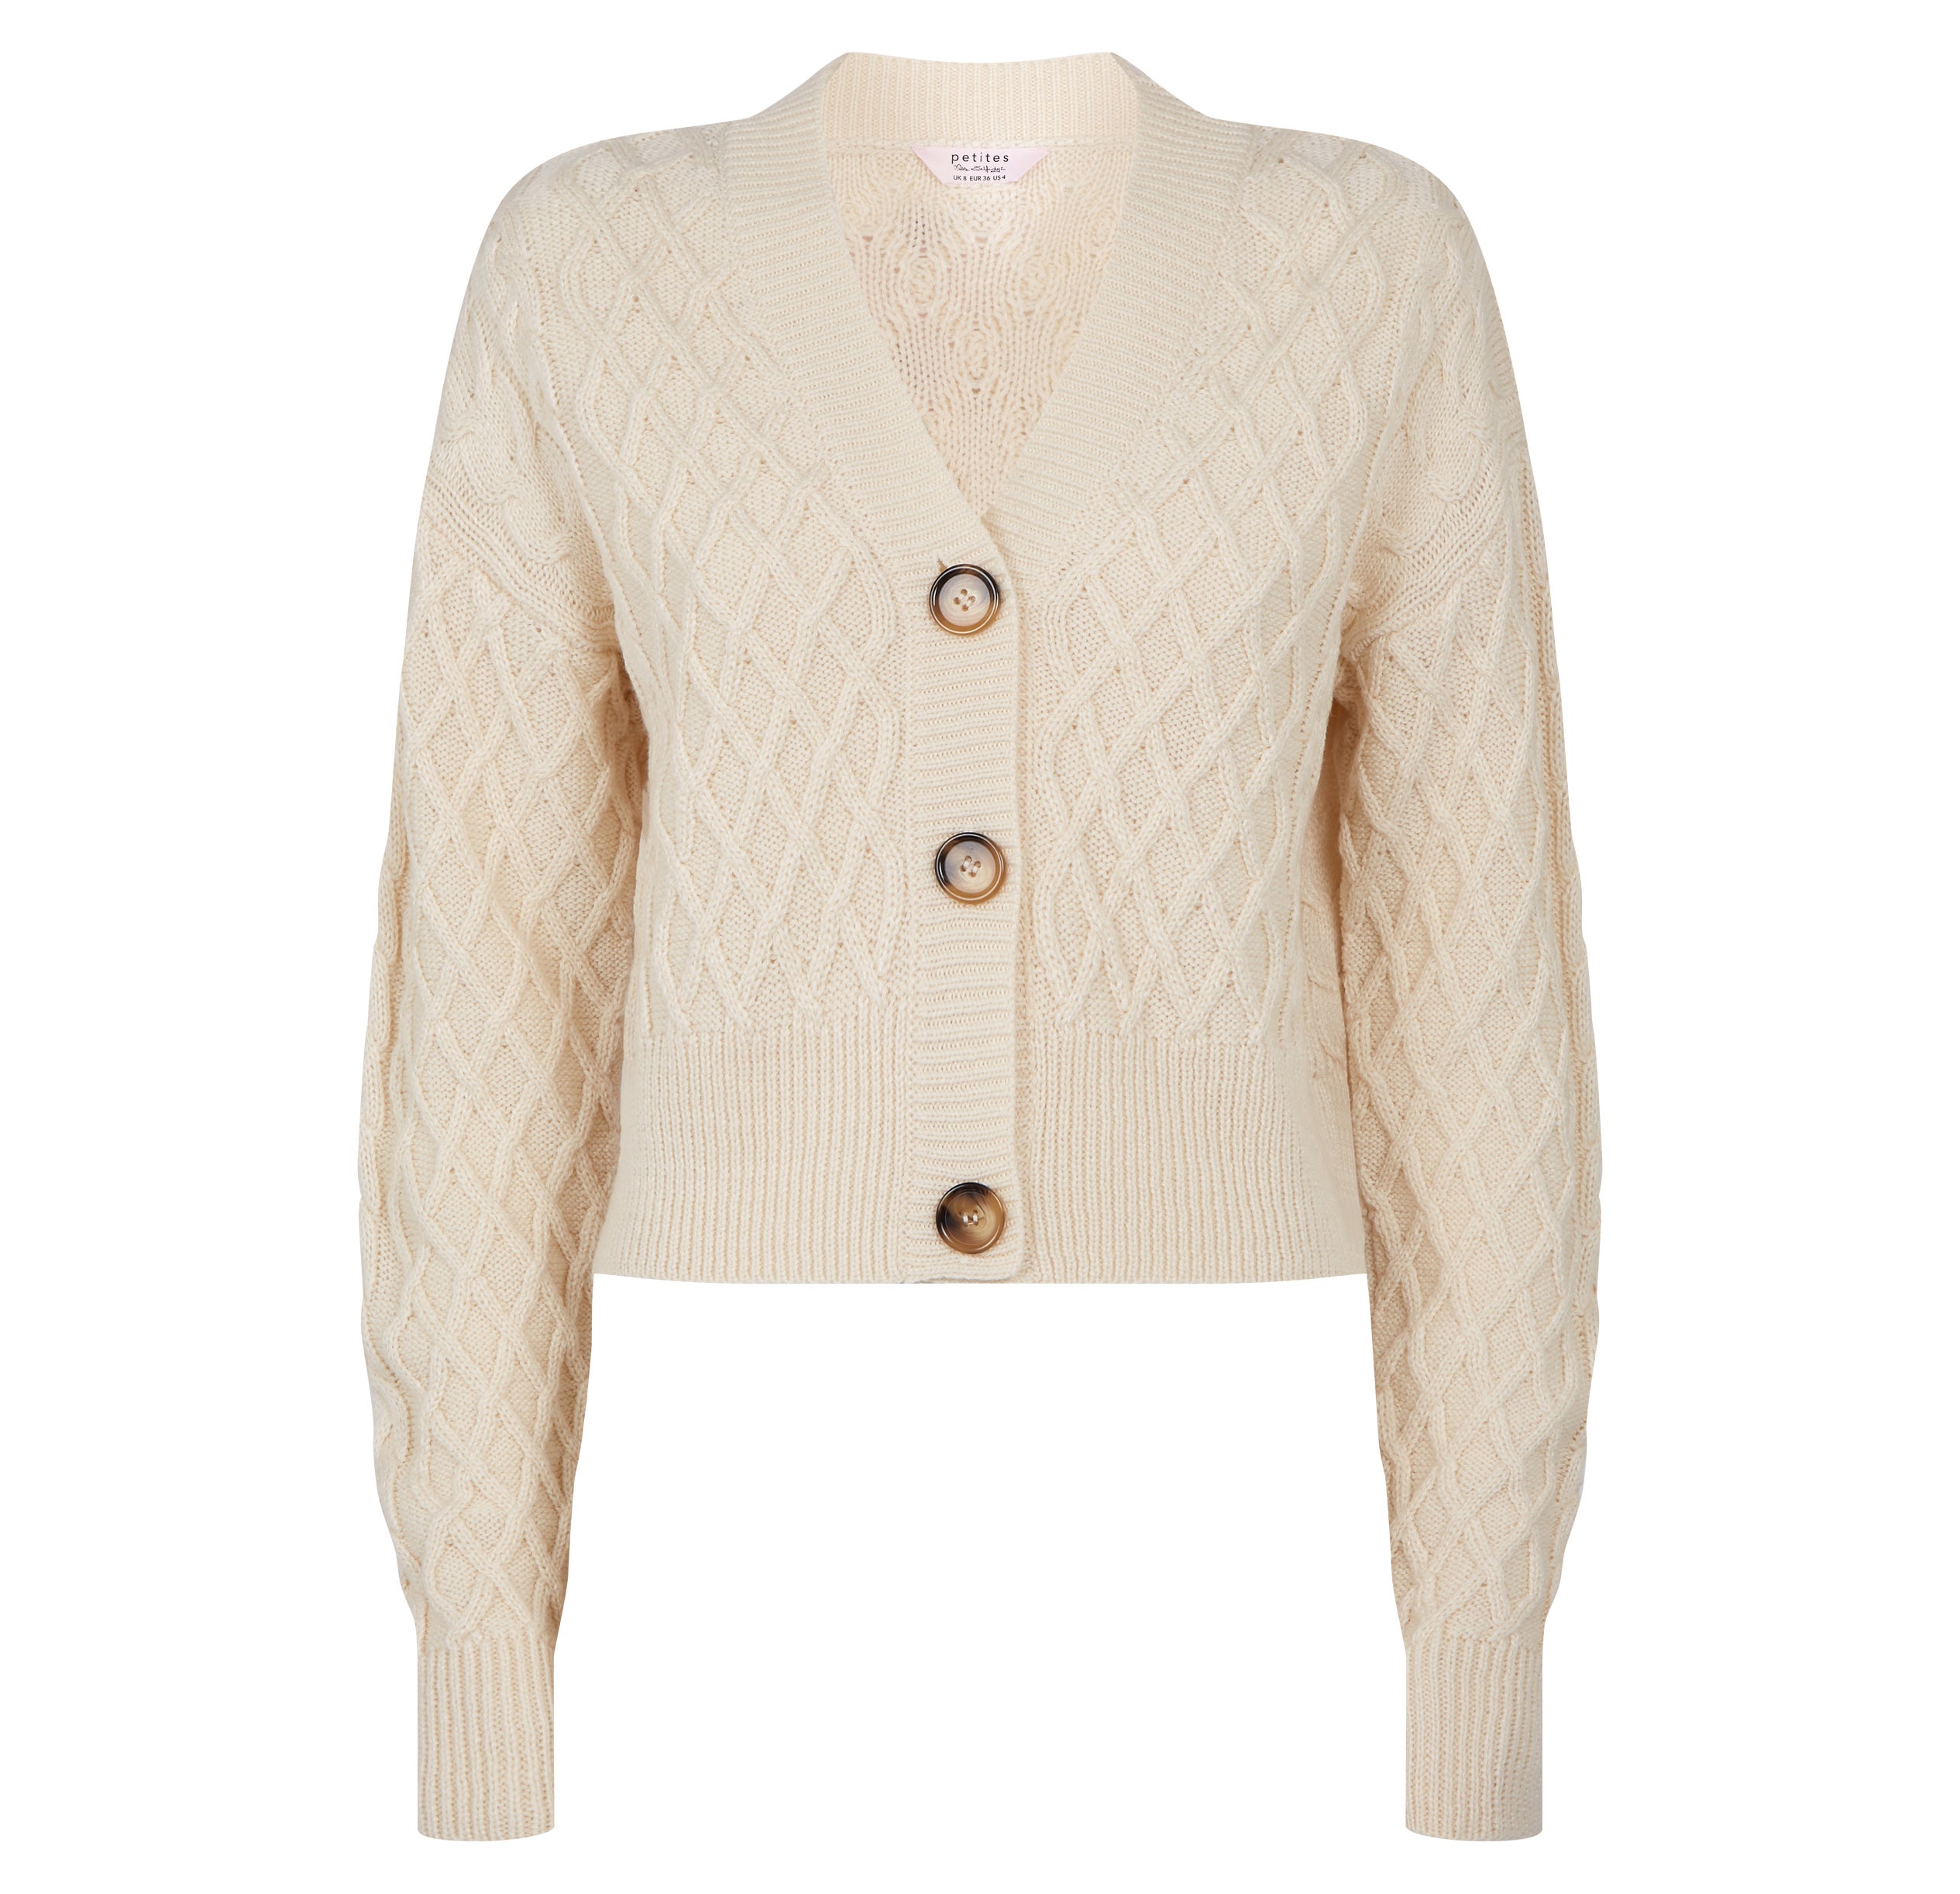 Miss Selfridge Petite Twinset Cable Knit Cardigan in Oatmeal